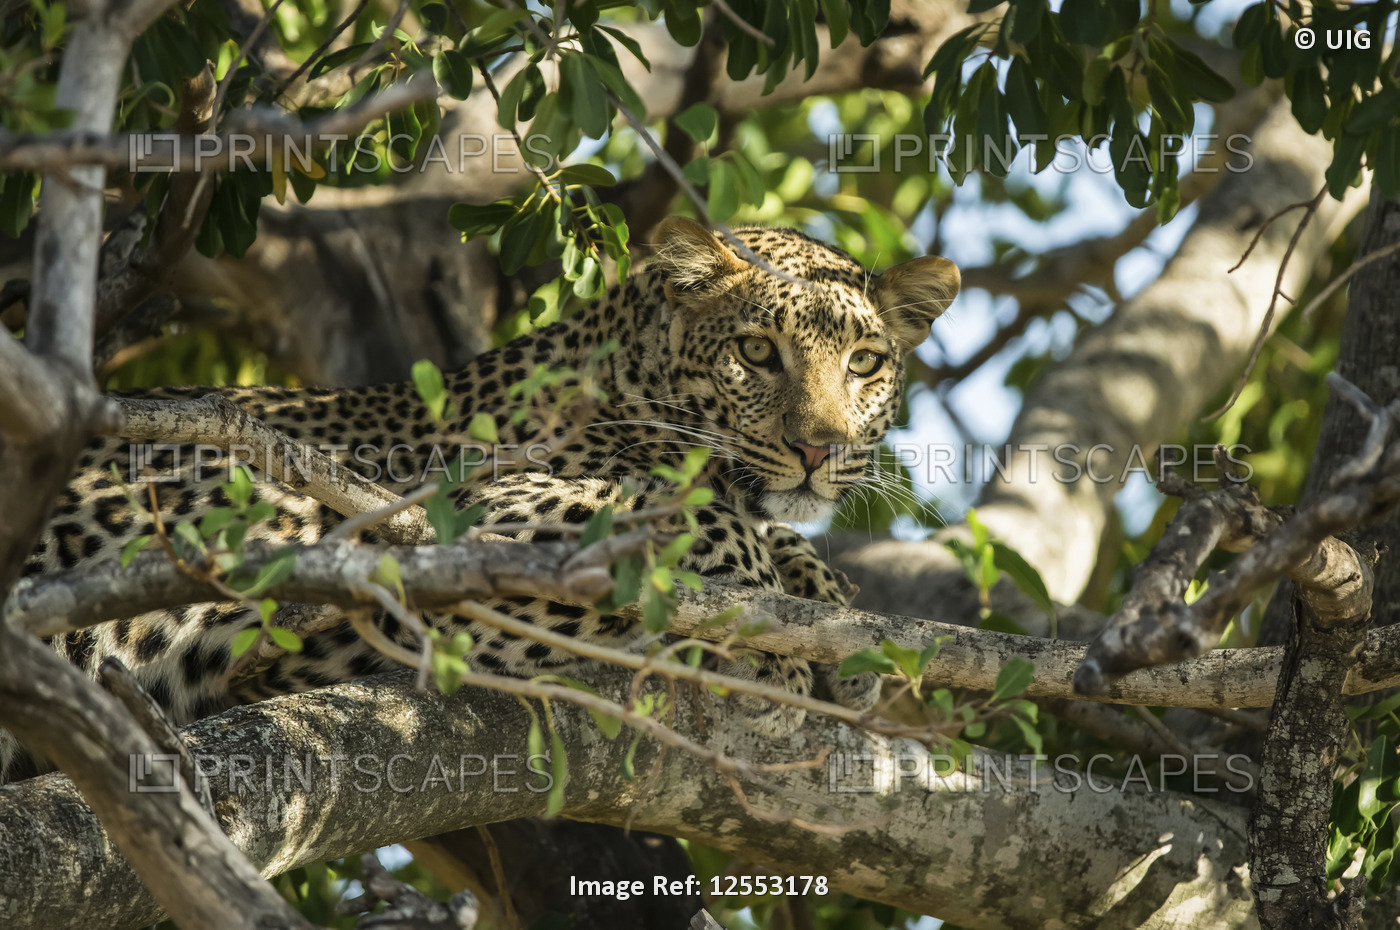 Leopard on a branch of a tree, Serengeti National Park, Tanzania